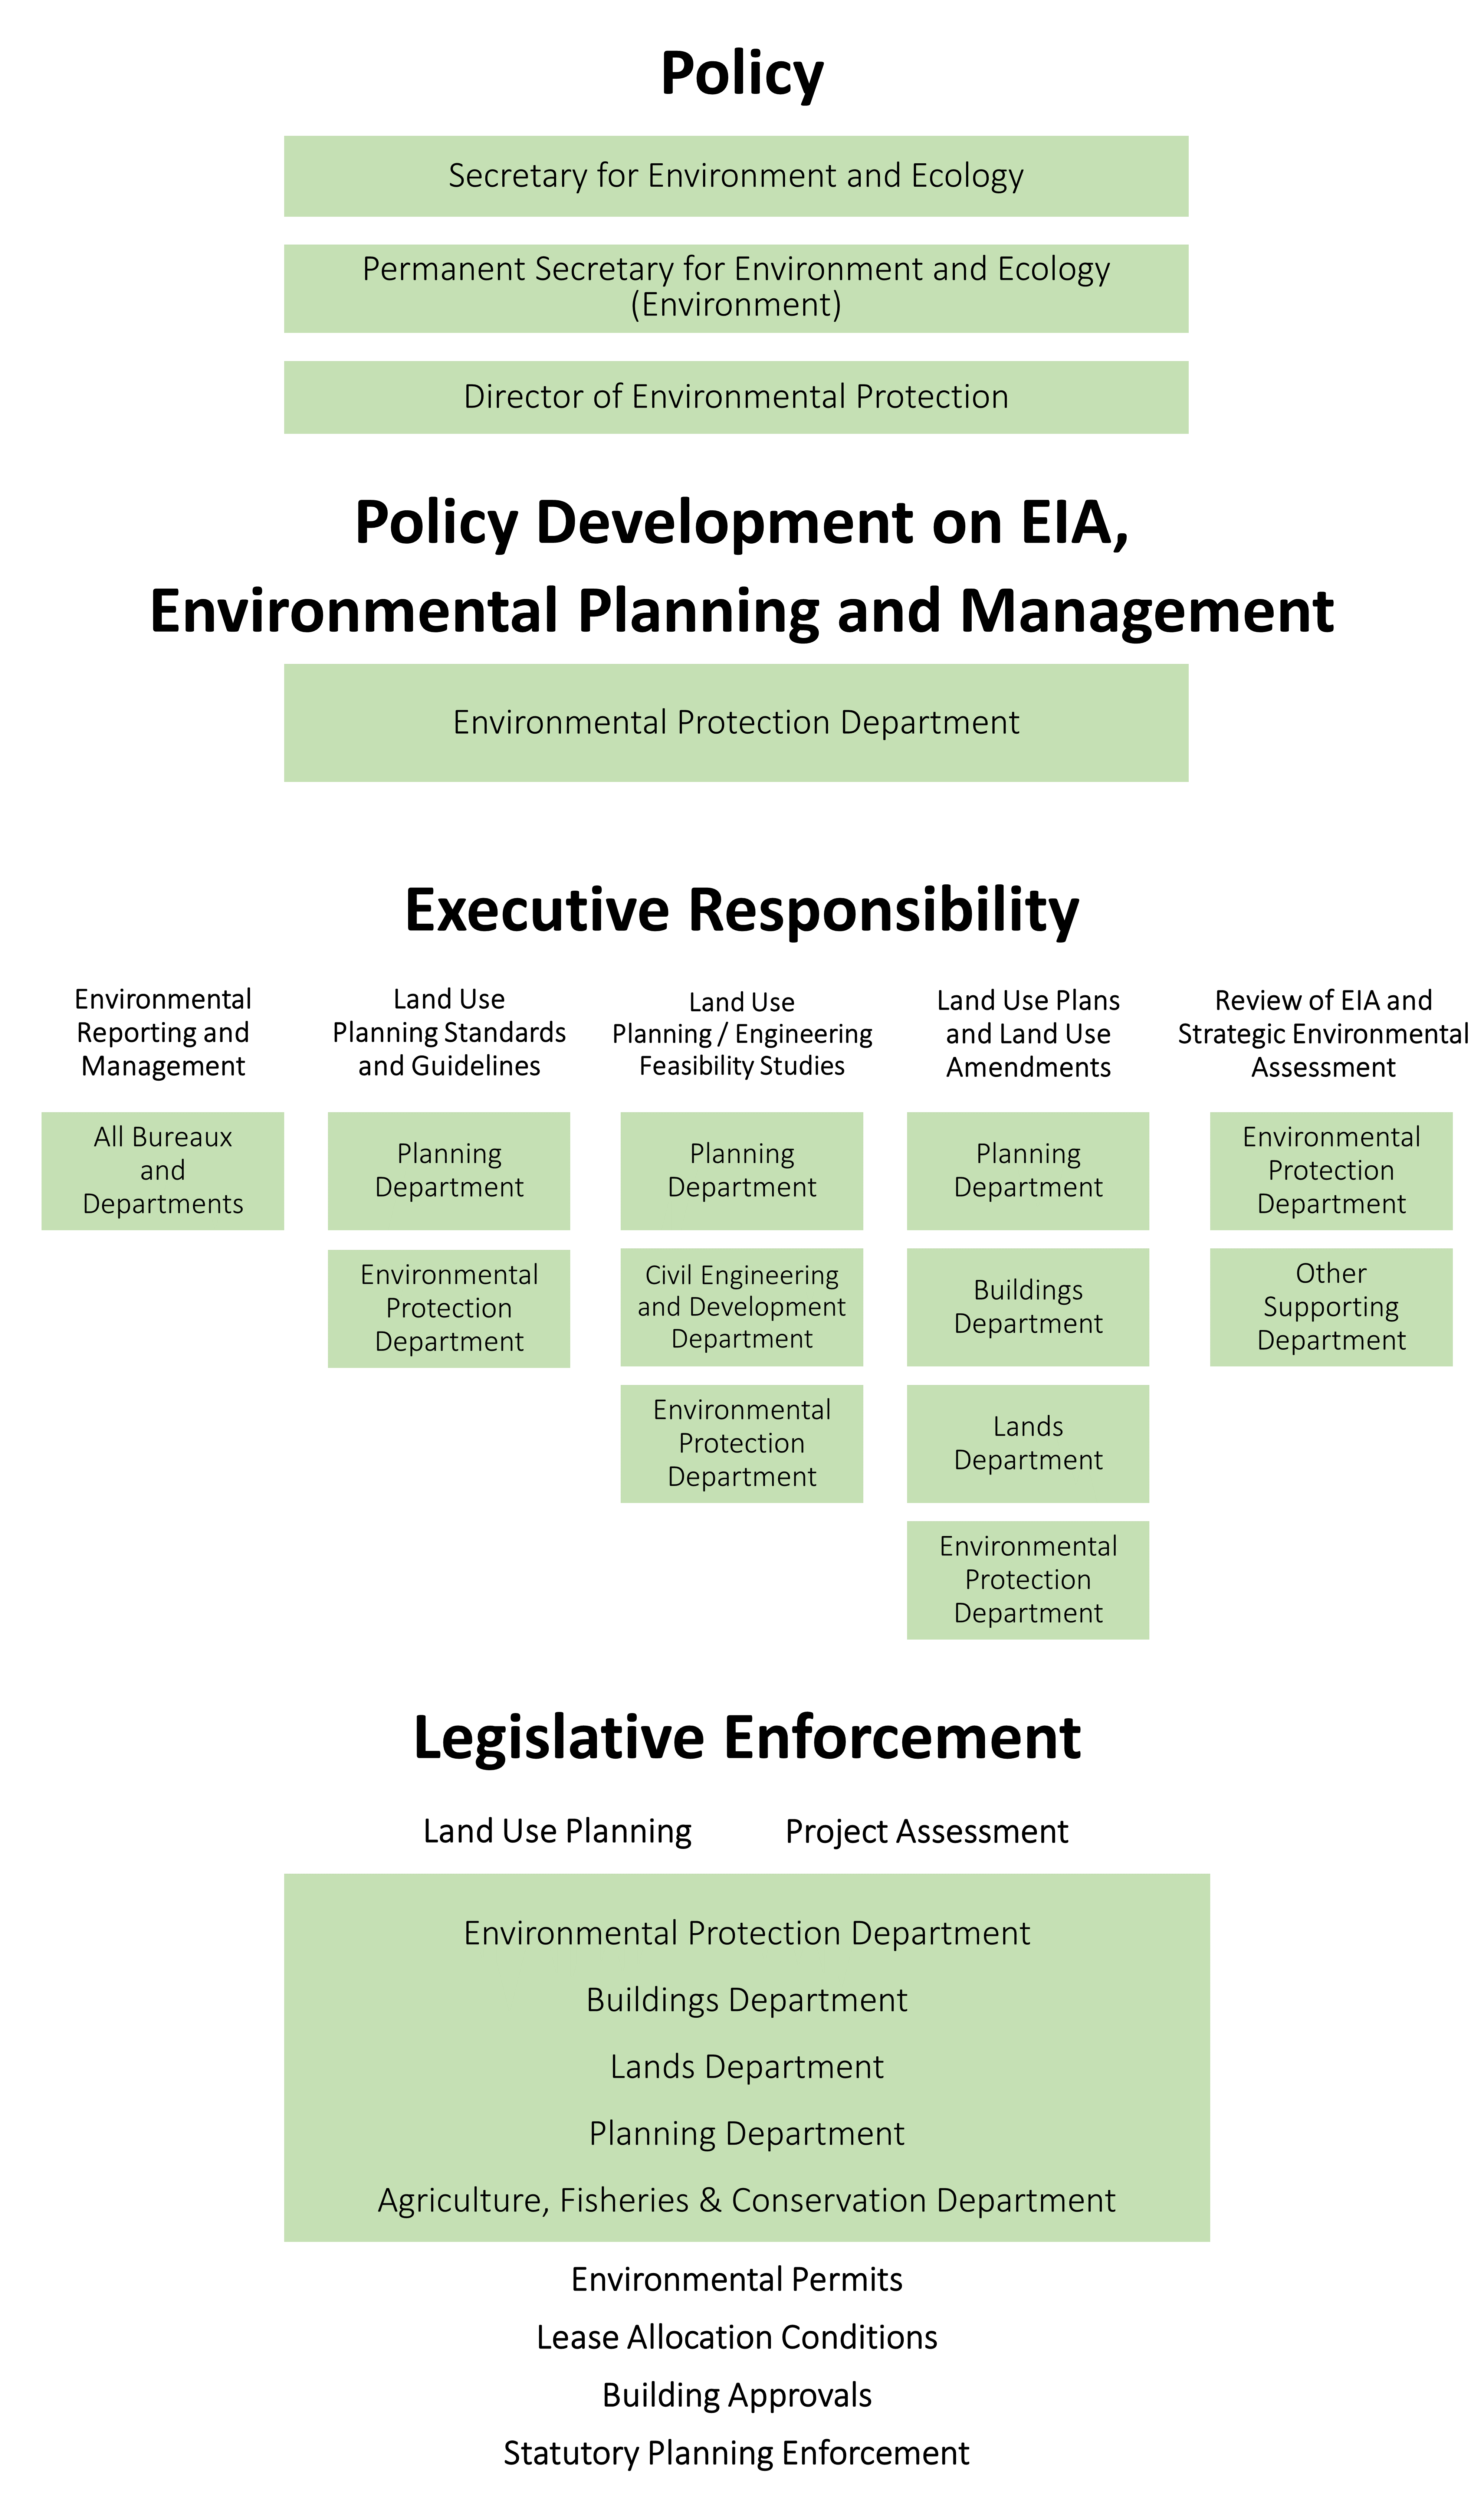 Government Structure for Environmental Assessment and Planning